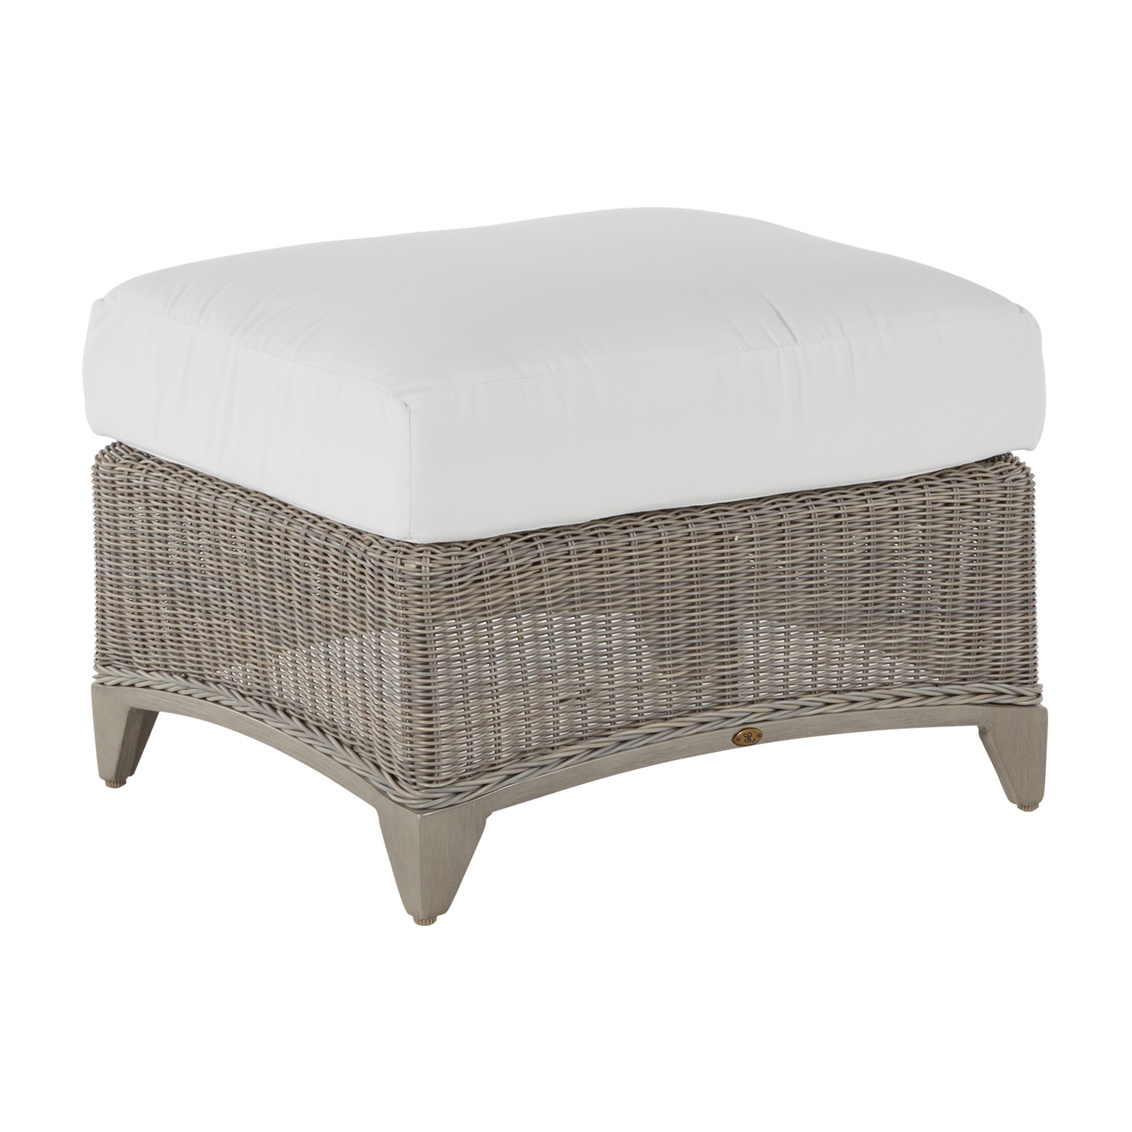 astoria ottoman in oyster – oyster – frame only product image